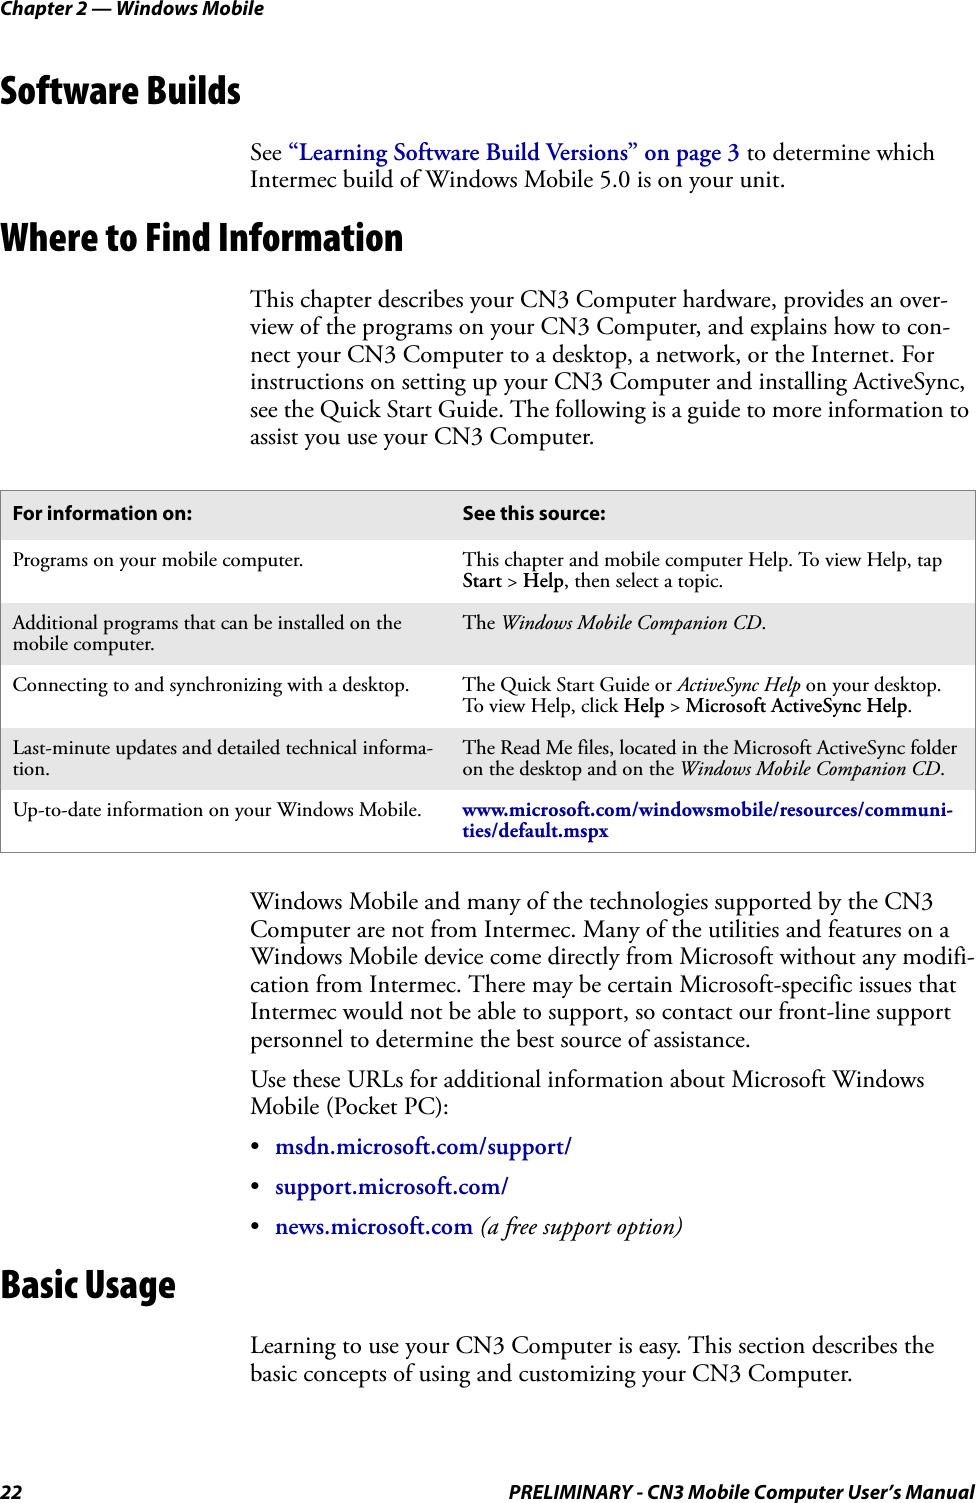 Chapter 2 — Windows Mobile22 PRELIMINARY - CN3 Mobile Computer User’s ManualSoftware BuildsSee “Learning Software Build Versions” on page 3 to determine which Intermec build of Windows Mobile 5.0 is on your unit.Where to Find InformationThis chapter describes your CN3 Computer hardware, provides an over-view of the programs on your CN3 Computer, and explains how to con-nect your CN3 Computer to a desktop, a network, or the Internet. For instructions on setting up your CN3 Computer and installing ActiveSync, see the Quick Start Guide. The following is a guide to more information to assist you use your CN3 Computer.Windows Mobile and many of the technologies supported by the CN3 Computer are not from Intermec. Many of the utilities and features on a Windows Mobile device come directly from Microsoft without any modifi-cation from Intermec. There may be certain Microsoft-specific issues that Intermec would not be able to support, so contact our front-line support personnel to determine the best source of assistance.Use these URLs for additional information about Microsoft Windows Mobile (Pocket PC):•msdn.microsoft.com/support/•support.microsoft.com/•news.microsoft.com (a free support option)Basic UsageLearning to use your CN3 Computer is easy. This section describes the basic concepts of using and customizing your CN3 Computer.For information on: See this source:Programs on your mobile computer. This chapter and mobile computer Help. To view Help, tap Start &gt; Help, then select a topic.Additional programs that can be installed on the mobile computer.The Windows Mobile Companion CD.Connecting to and synchronizing with a desktop. The Quick Start Guide or ActiveSync Help on your desktop. To view Help, click Help &gt; Microsoft ActiveSync Help.Last-minute updates and detailed technical informa-tion.The Read Me files, located in the Microsoft ActiveSync folder on the desktop and on the Windows Mobile Companion CD.Up-to-date information on your Windows Mobile. www.microsoft.com/windowsmobile/resources/communi-ties/default.mspx